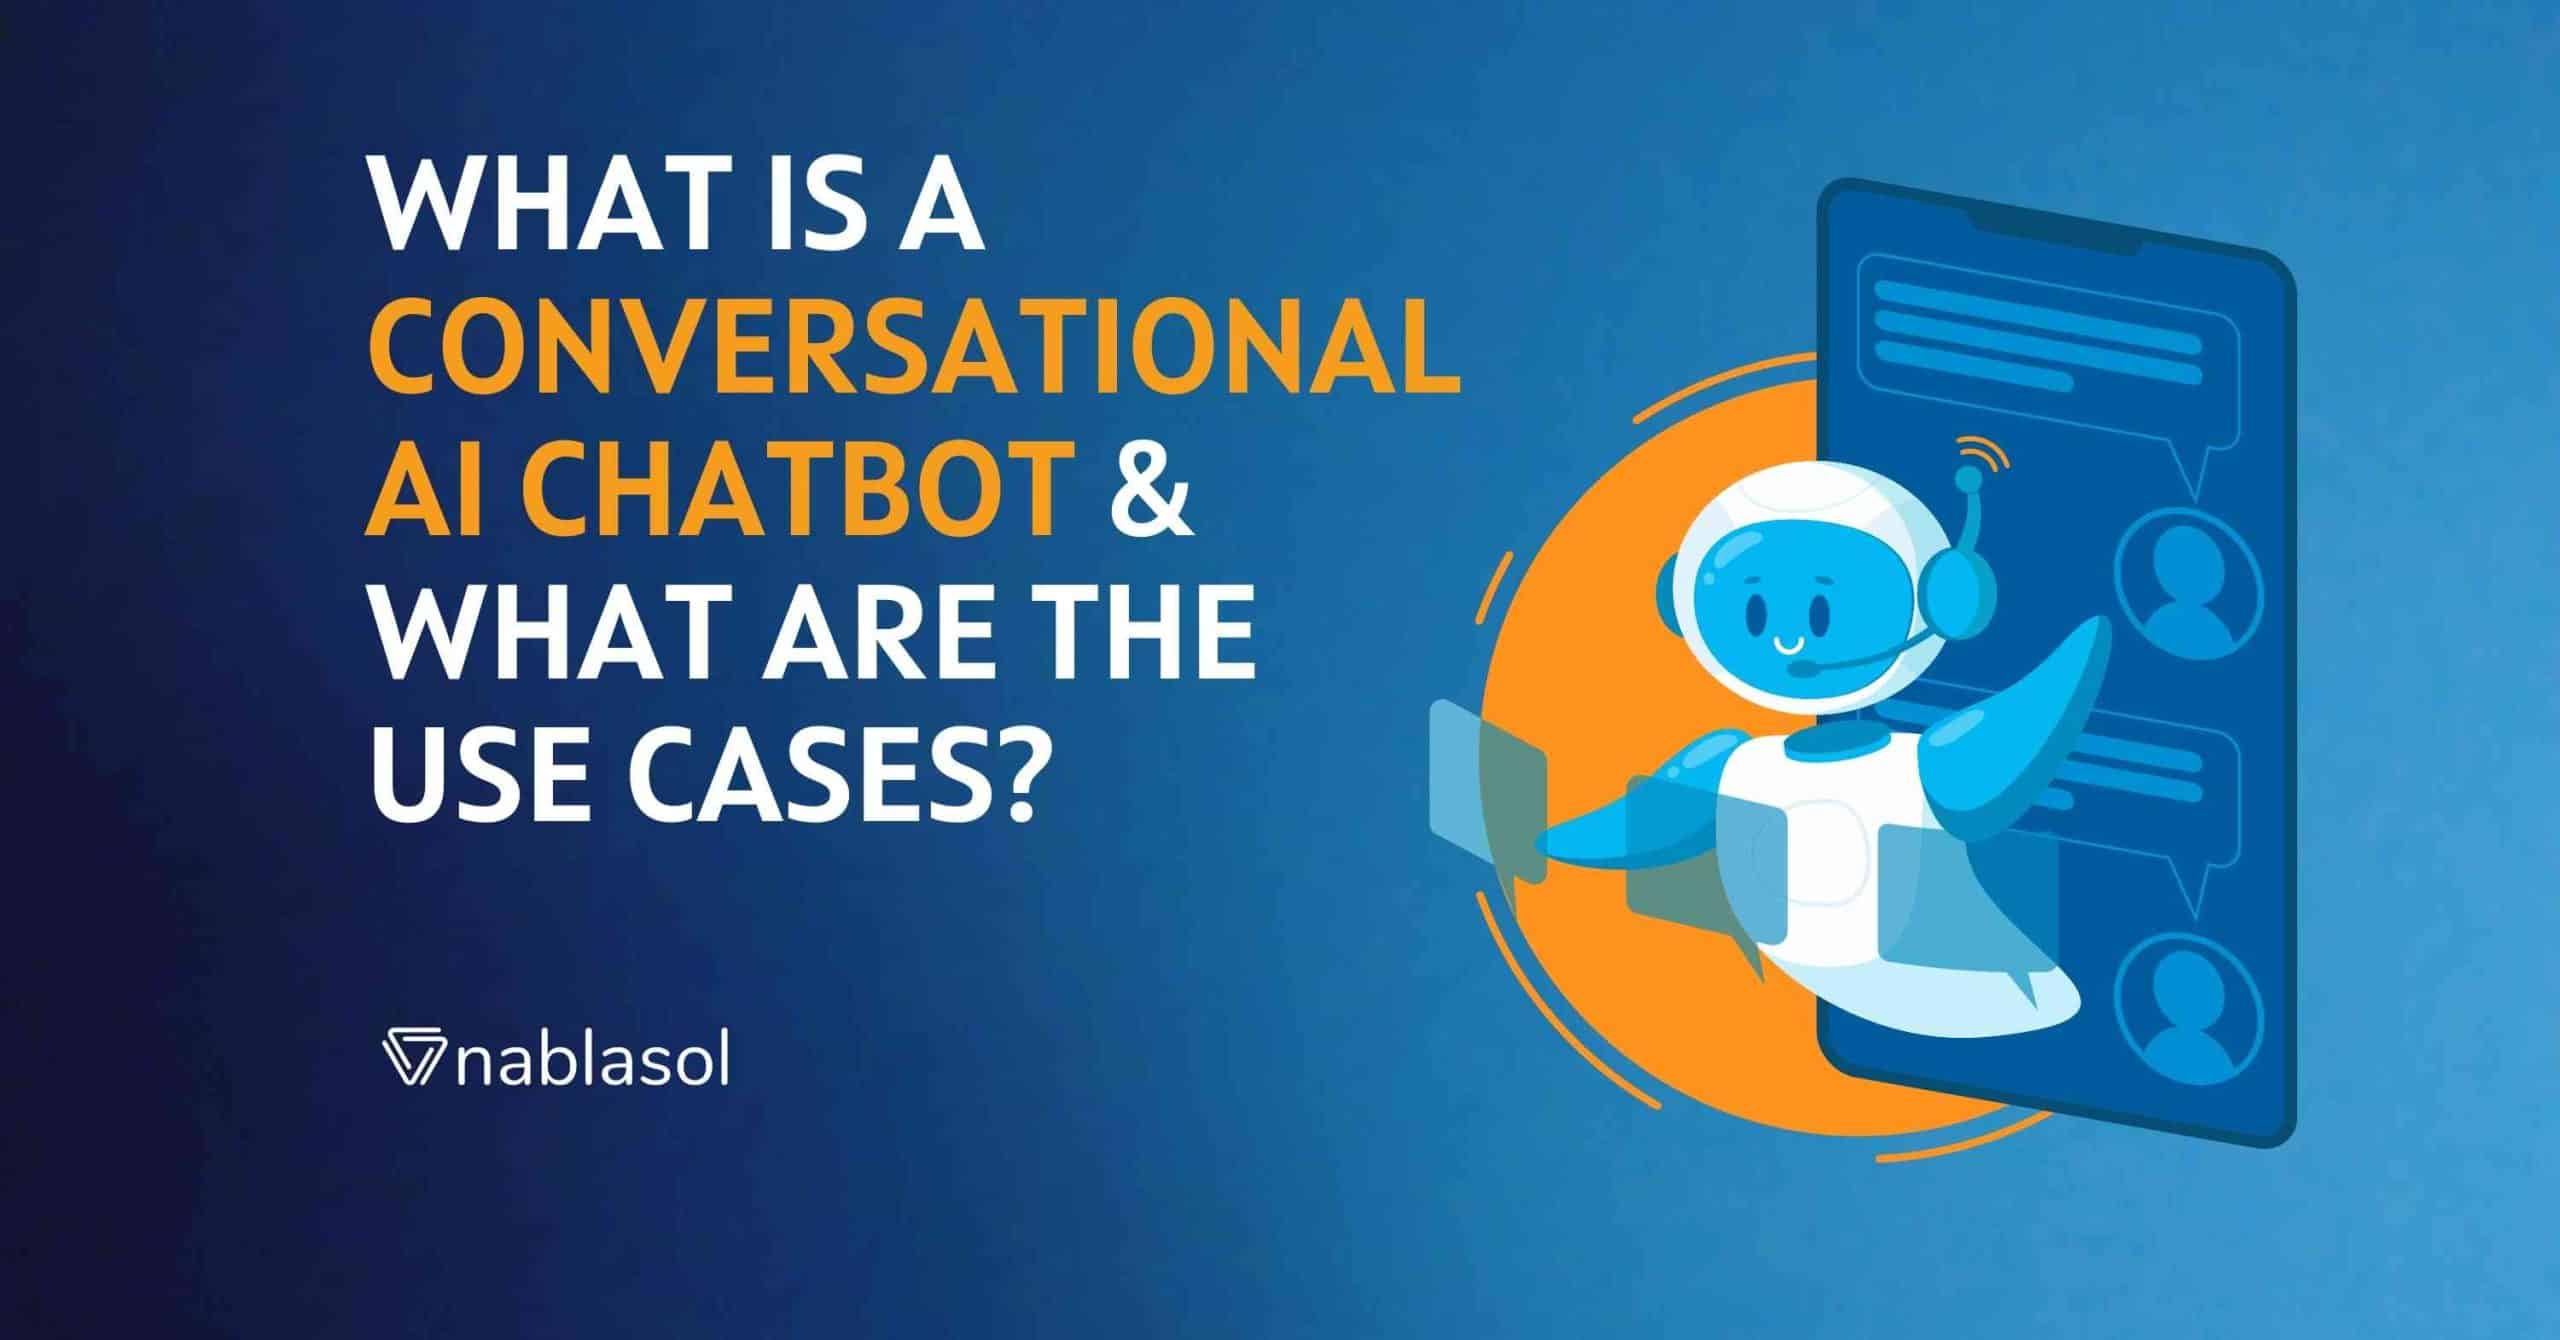 What Is A Conversational AI Chatbot & What Are The Use Cases?